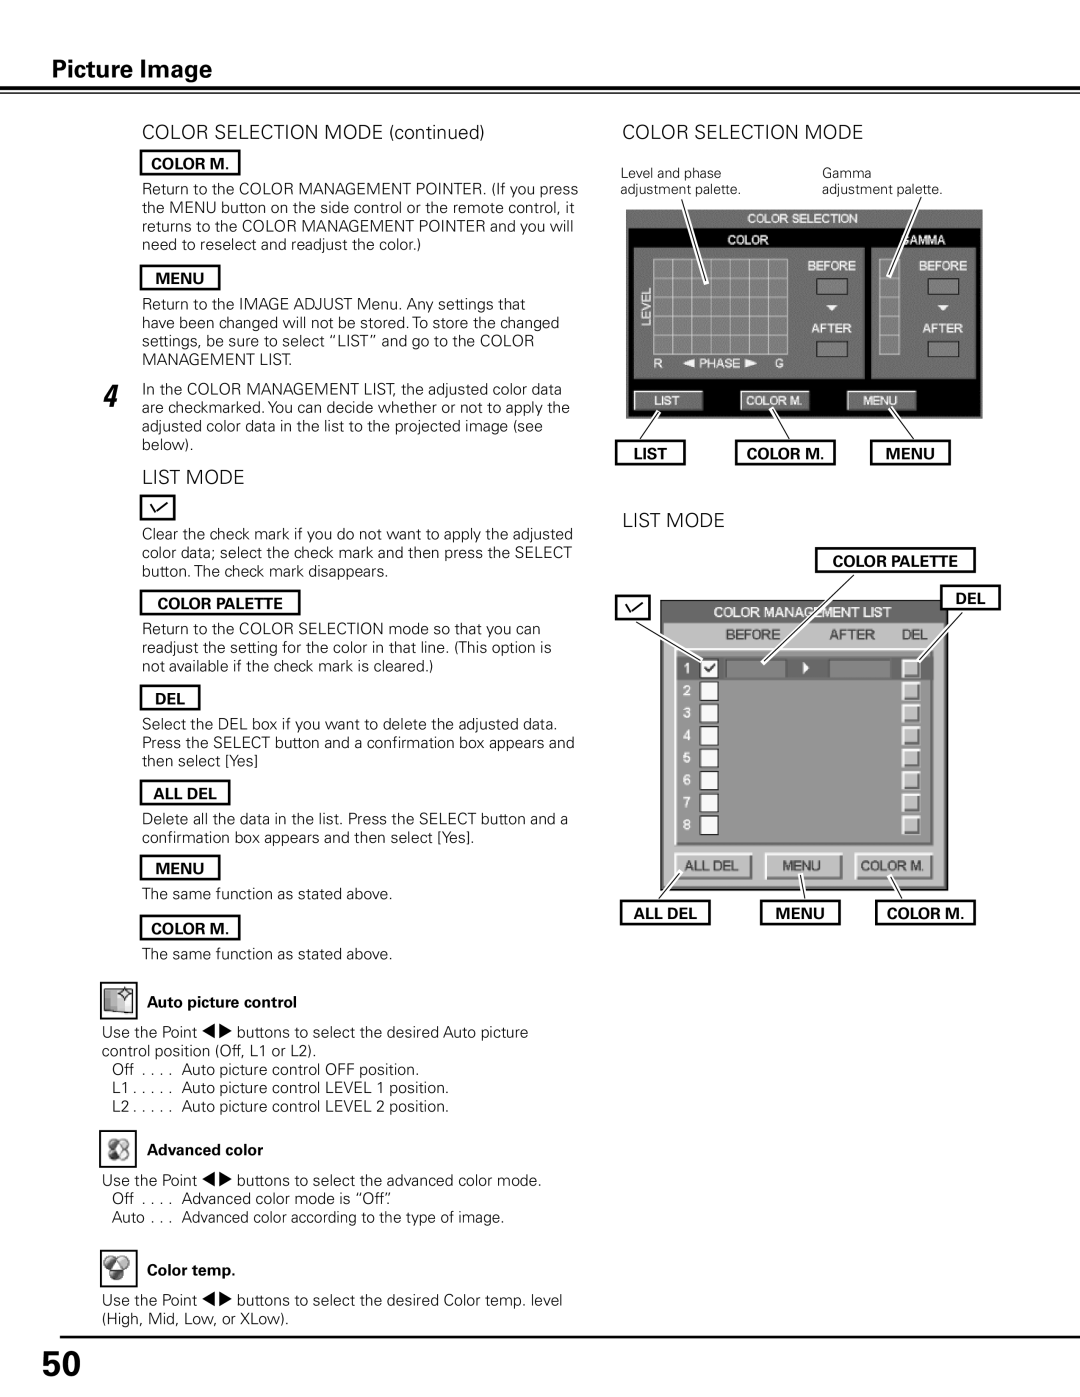 Sanyo PLC-XP200L owner manual Picture Image, COLOR SELECTION MODE continued, List Mode, Color Selection Mode 